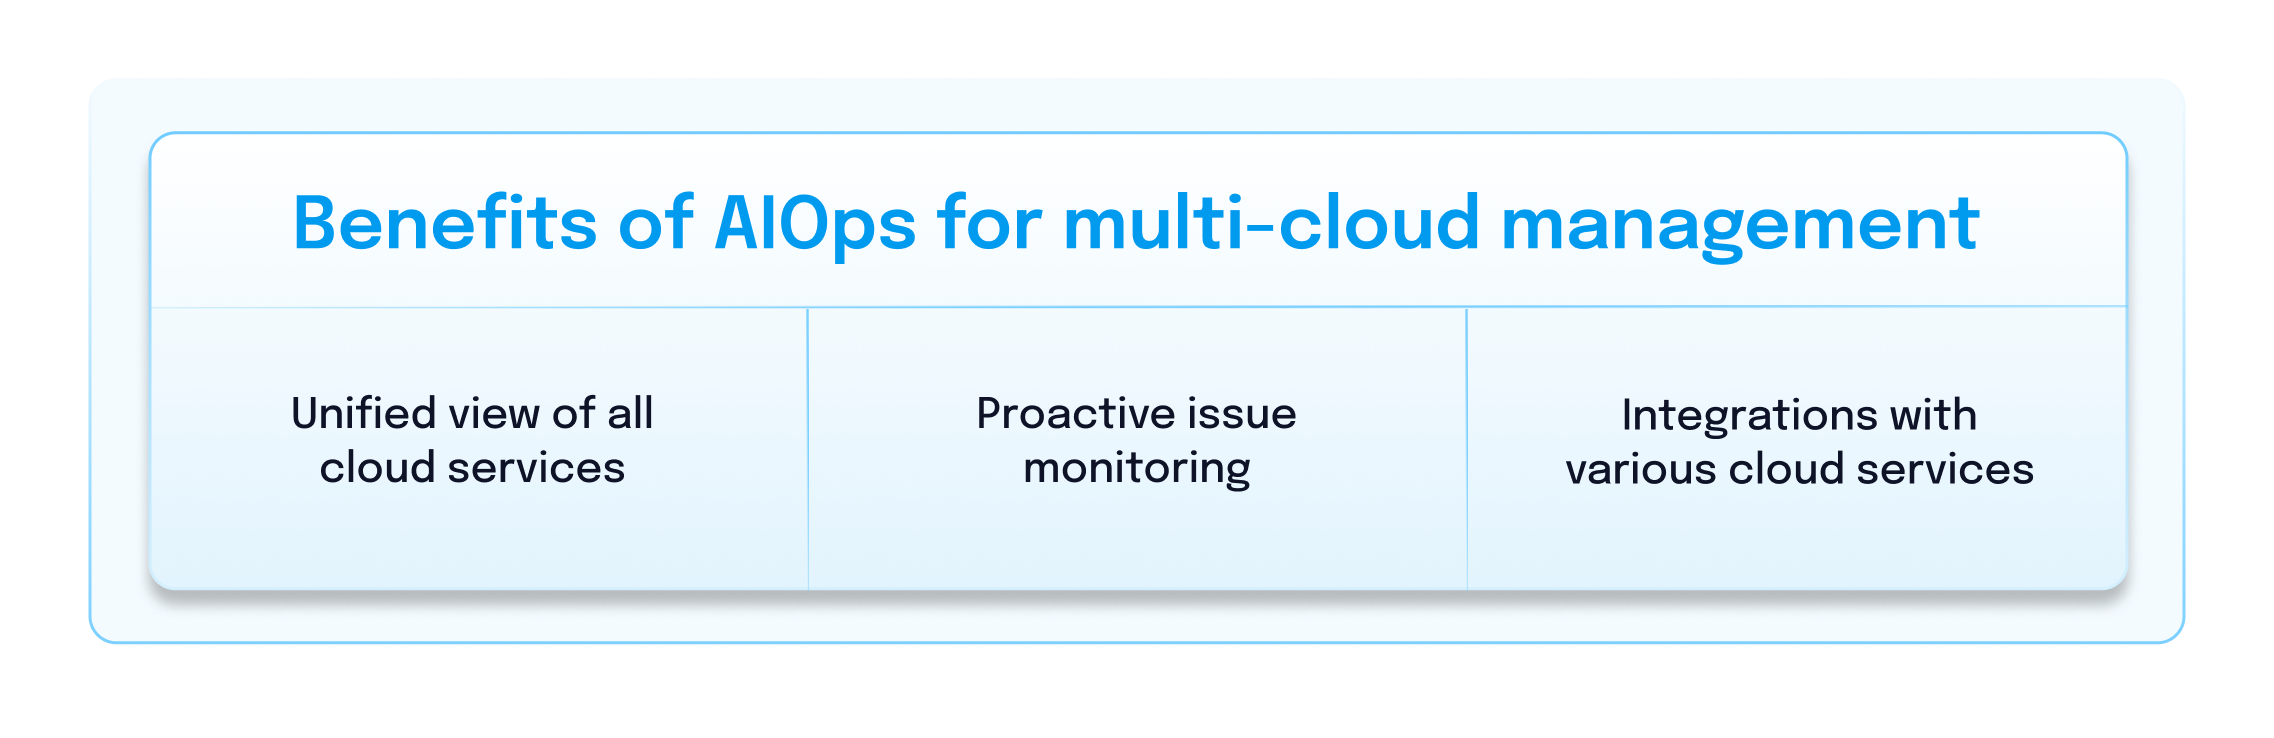 Benefits of AIOps for multi-cloud management